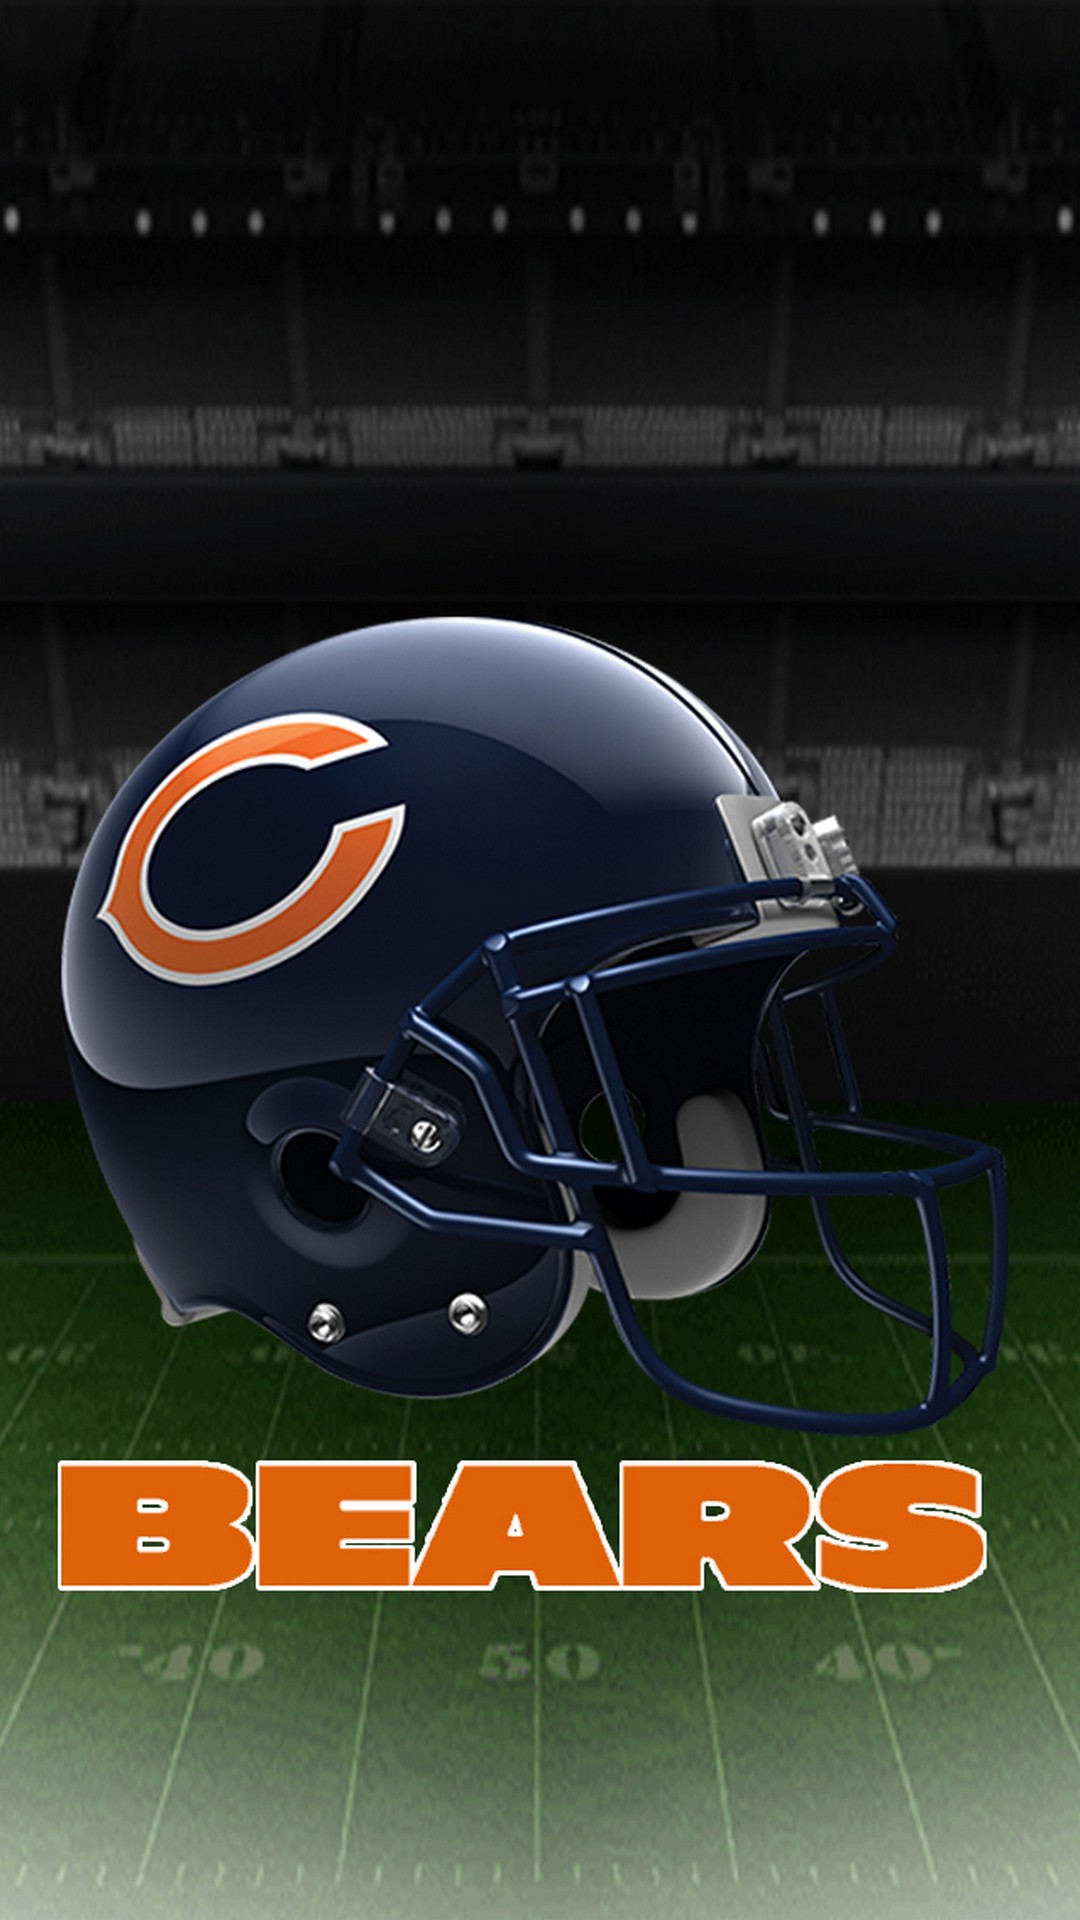 Chicago Bears iPhone Wallpaper New with high-resolution 1080x1920 pixel. Donwload and set as wallpaper for your iPhone X, iPhone XS home screen backgrounds, XS Max, XR, iPhone8 lock screen wallpaper, iPhone 7, 6, SE and other mobile devices